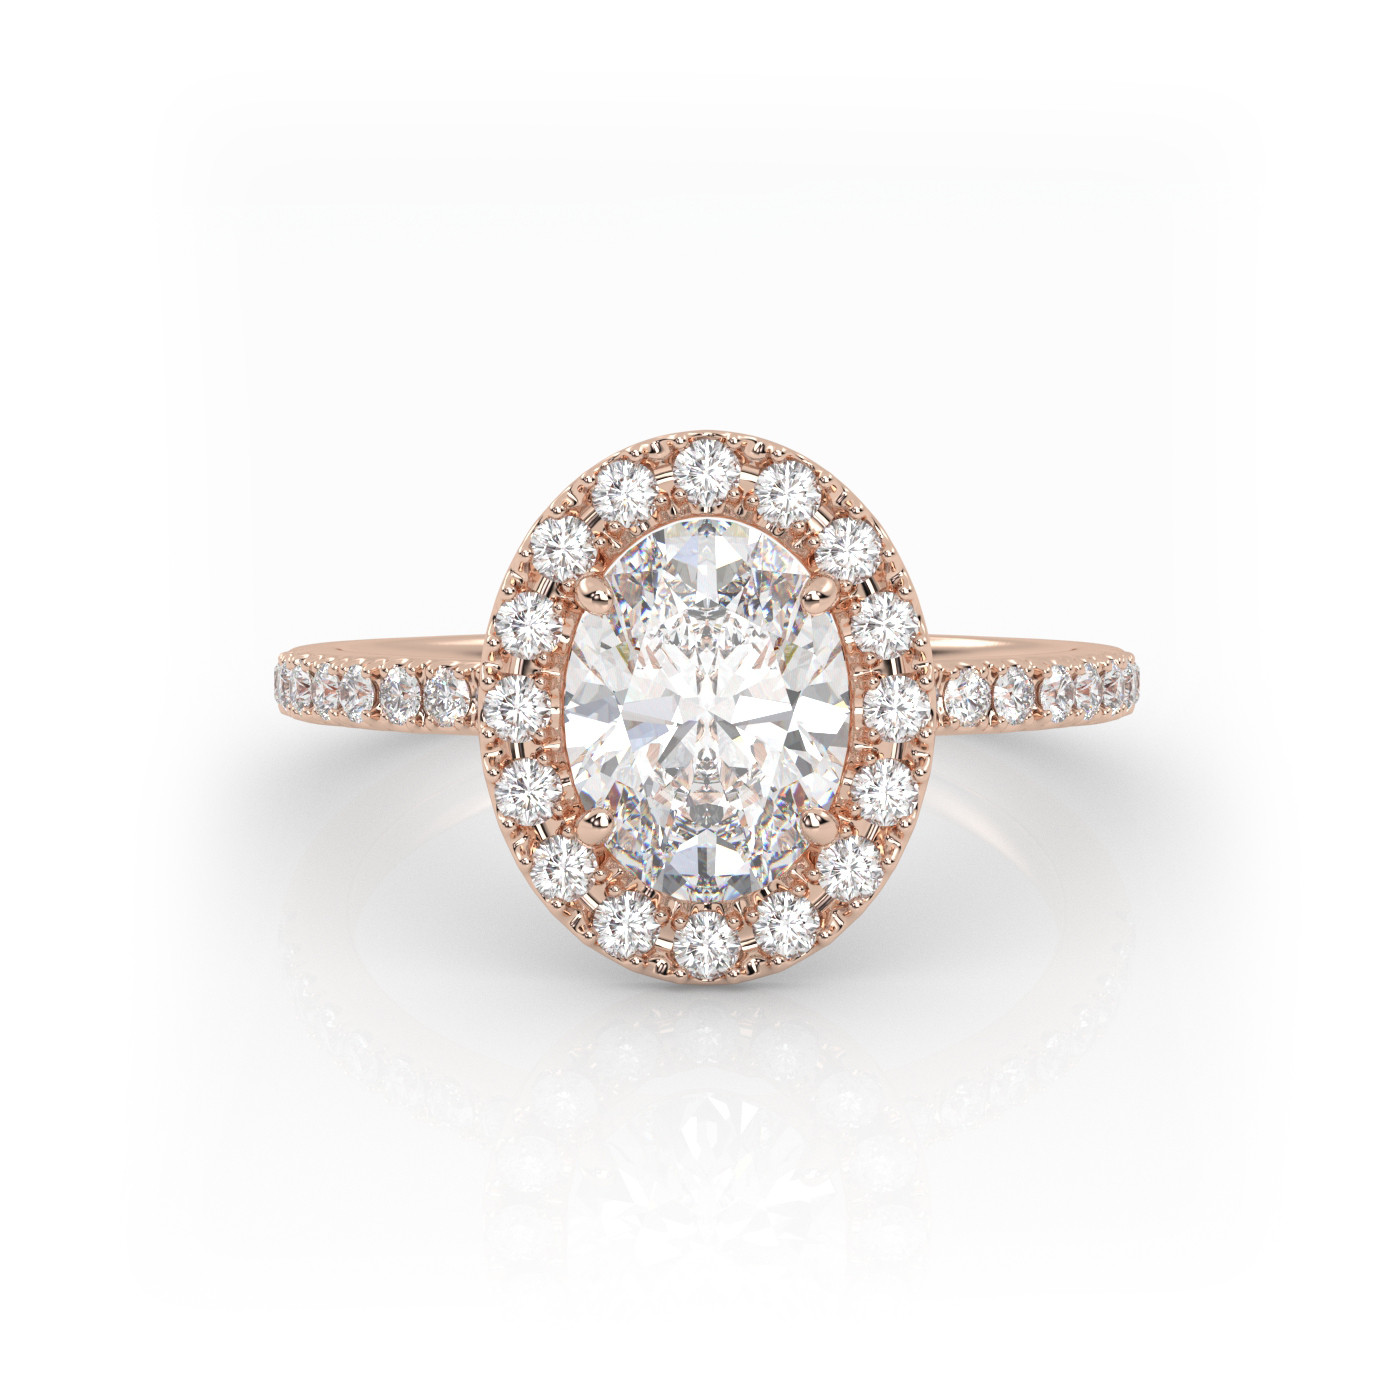 18K ROSE GOLD Oval Diamond Engagament Ring With Halo and Pave style